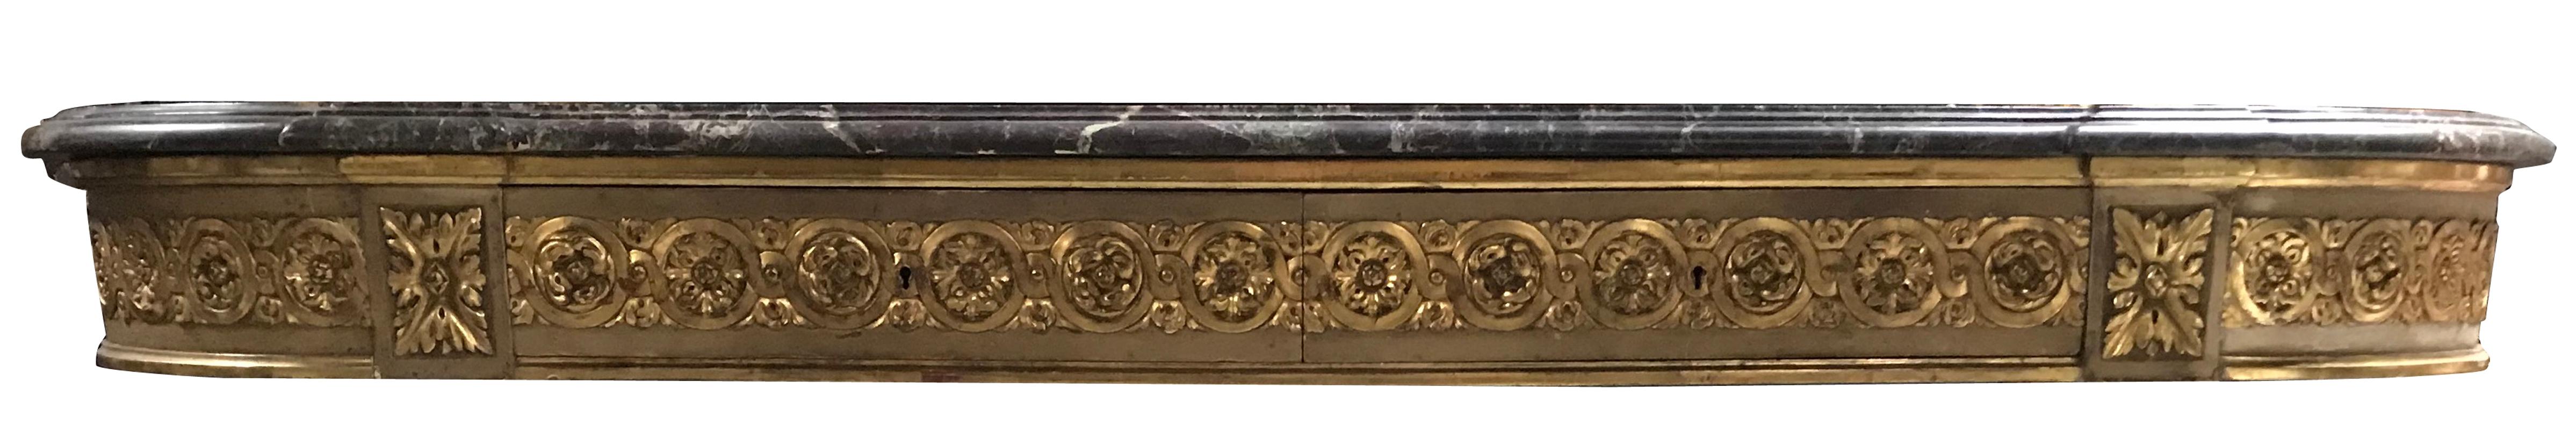 Marble Louis XVI Style Giltwood Console, 19th Century For Sale